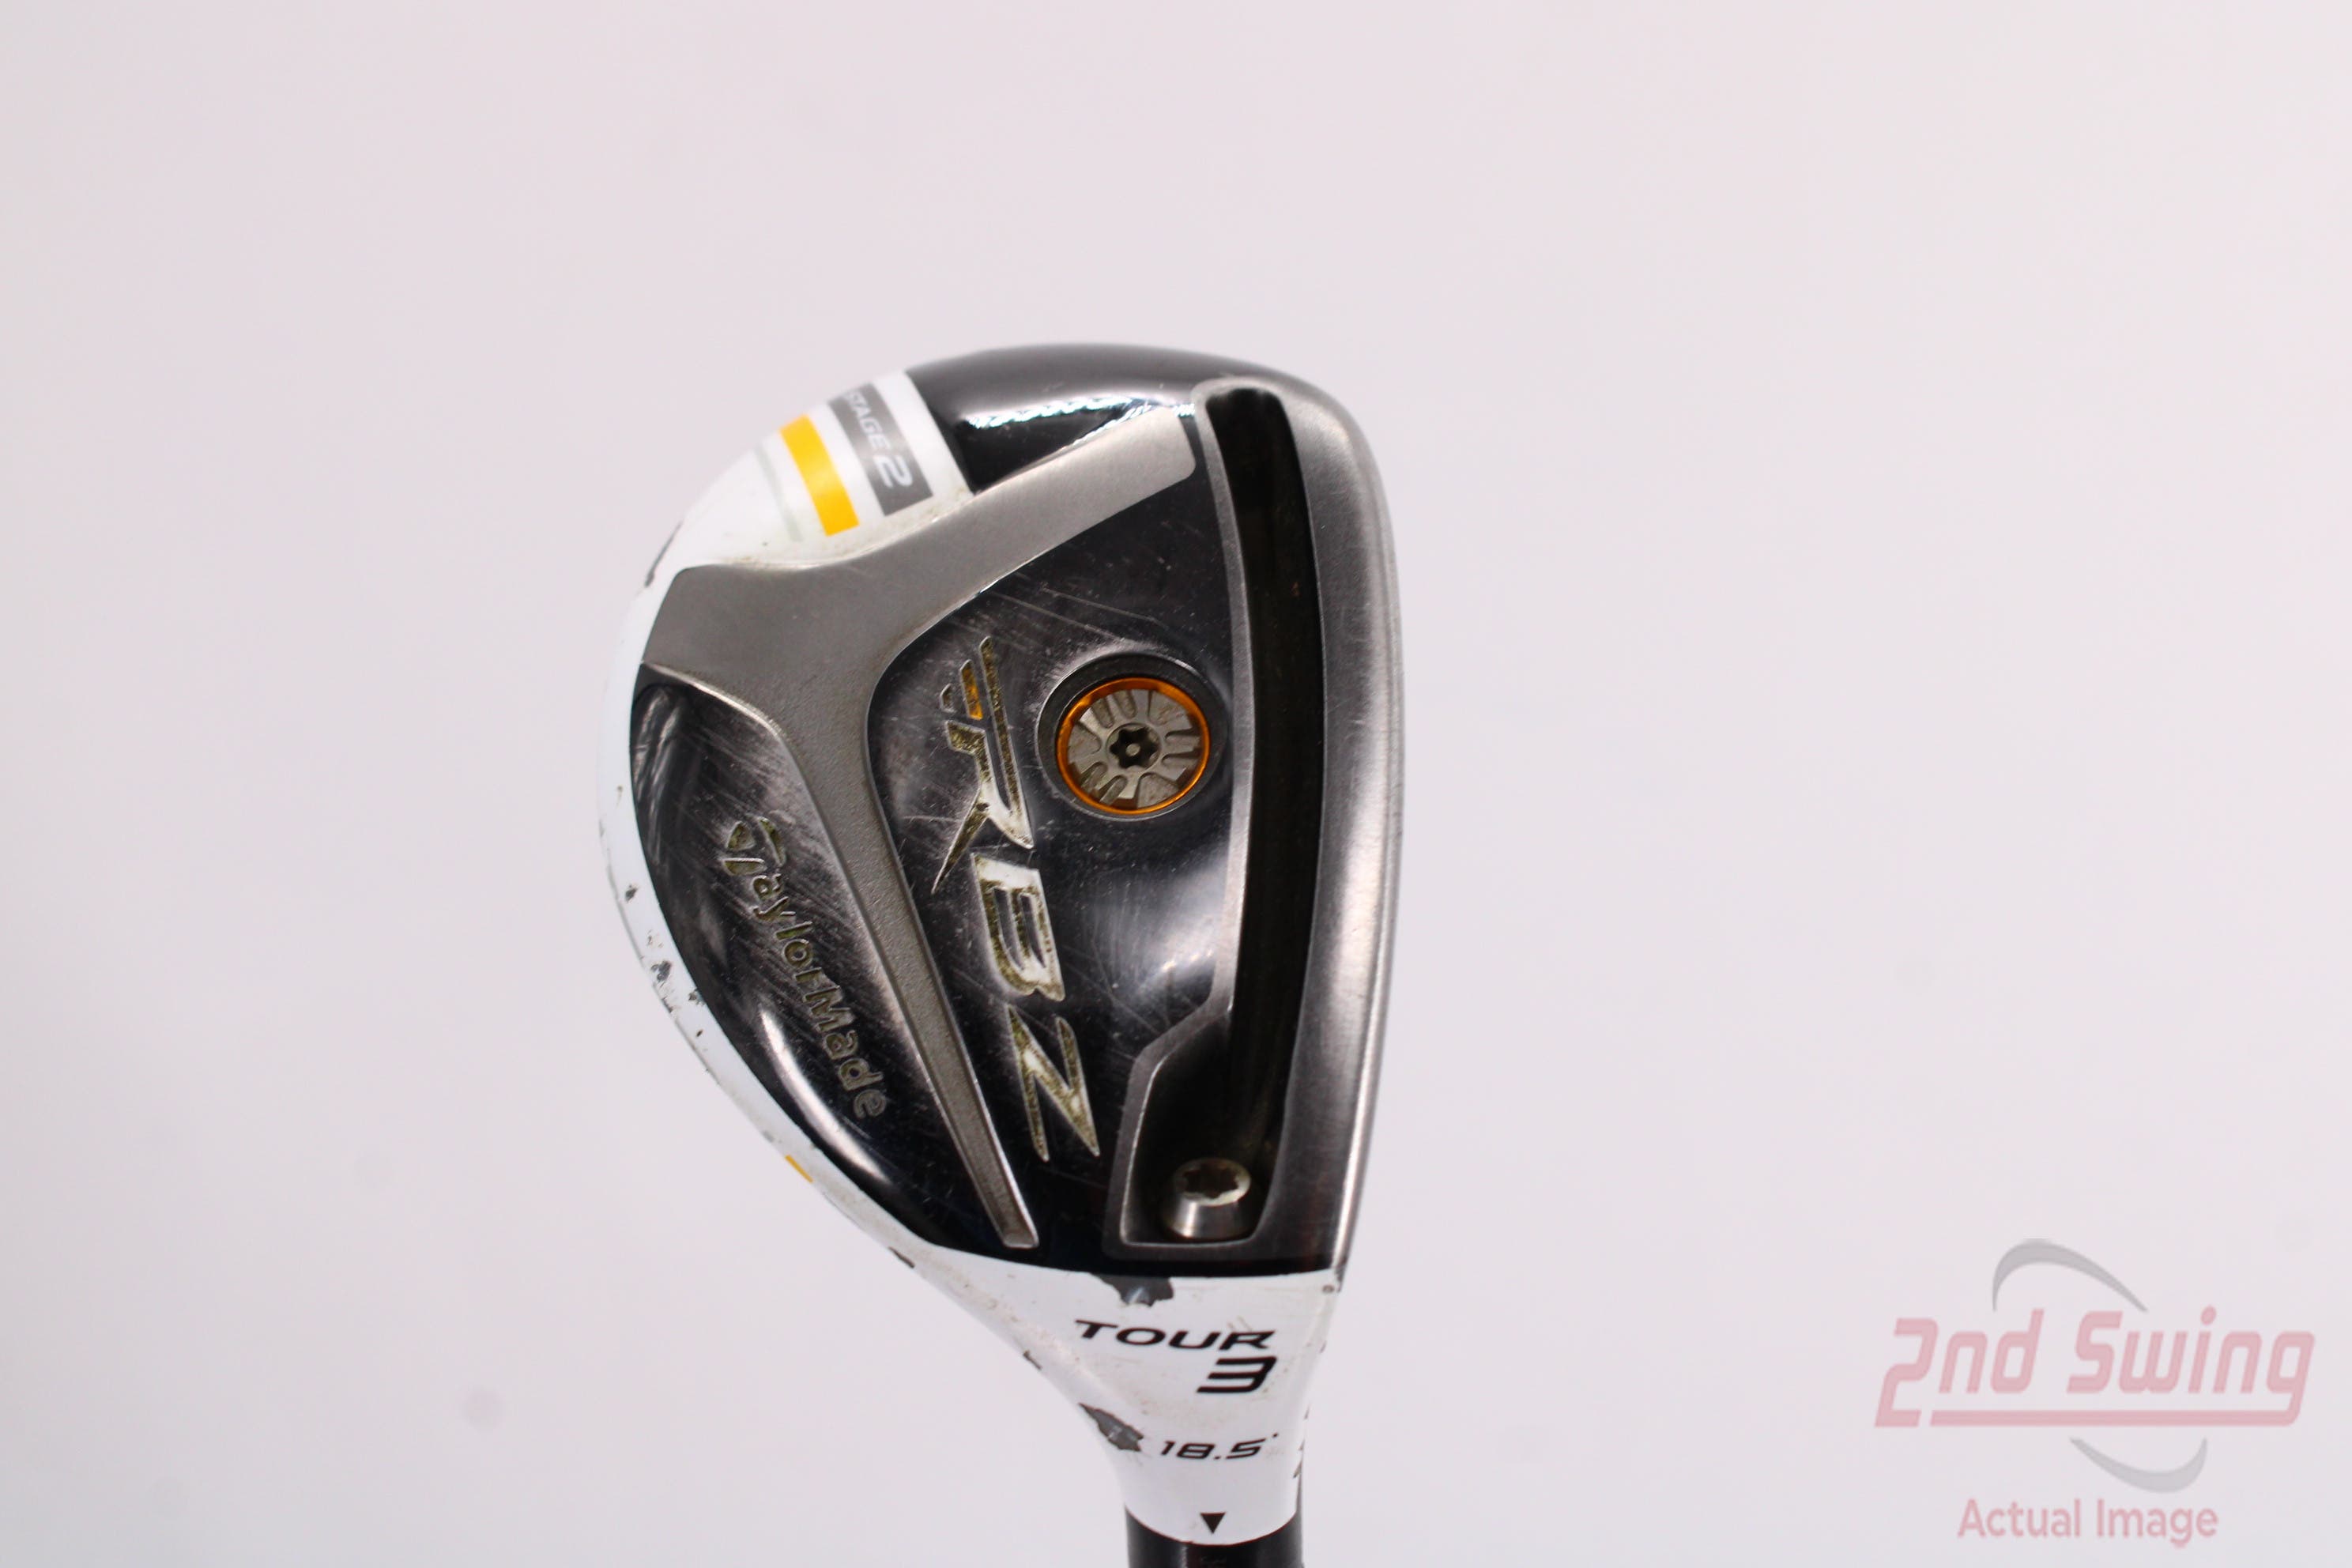 taylormade rbz stage 2 tour